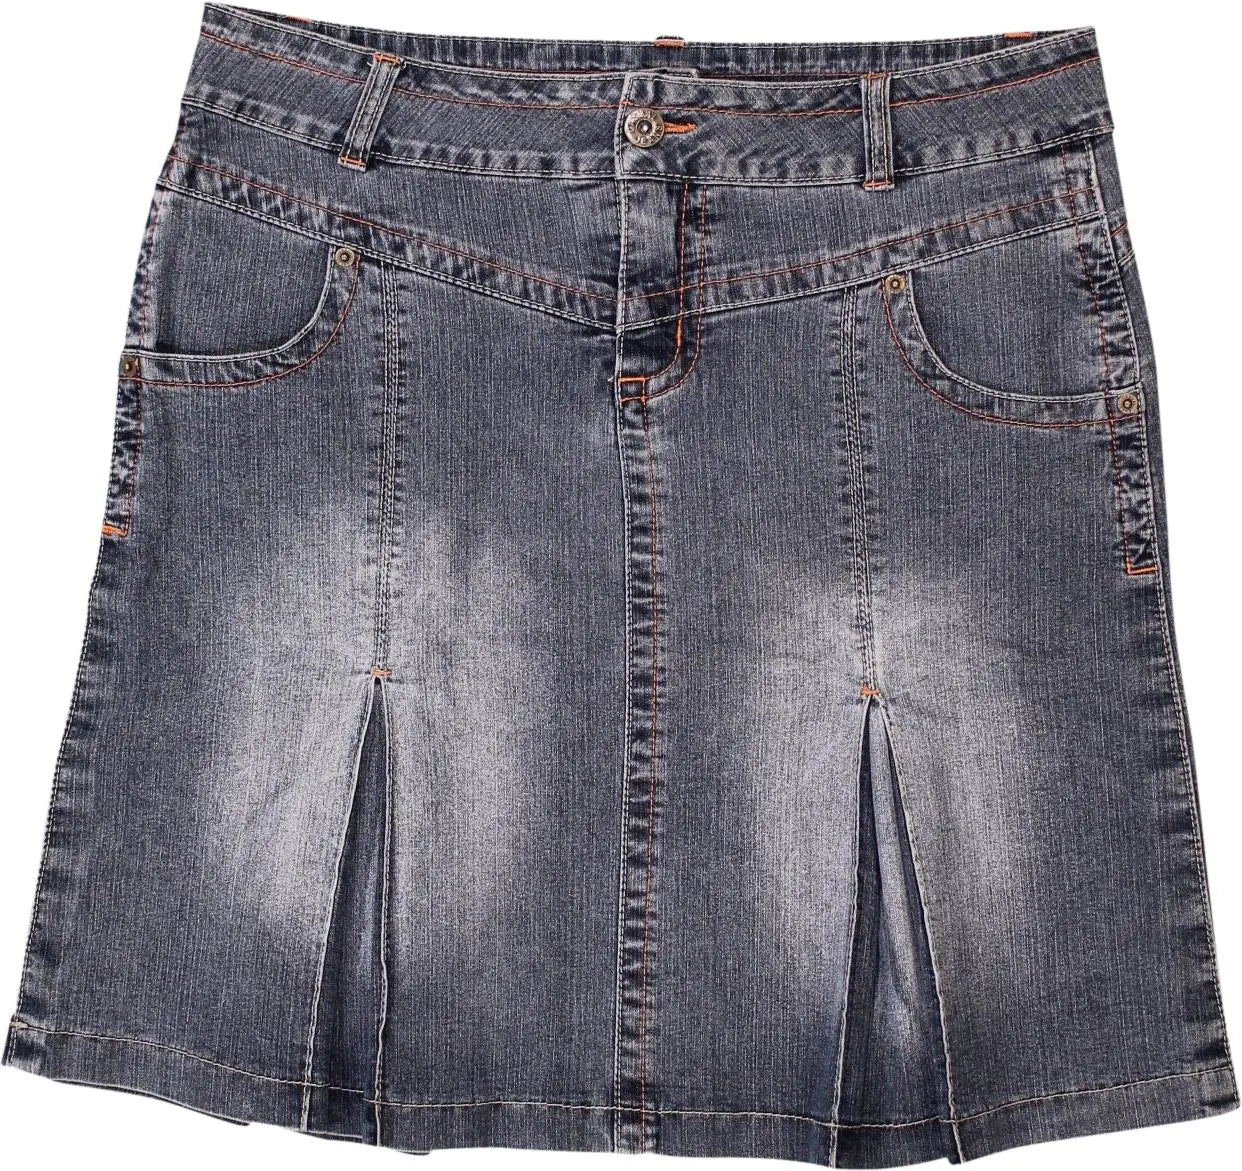 Casual Clothing - Short denim skirt- ThriftTale.com - Vintage and second handclothing